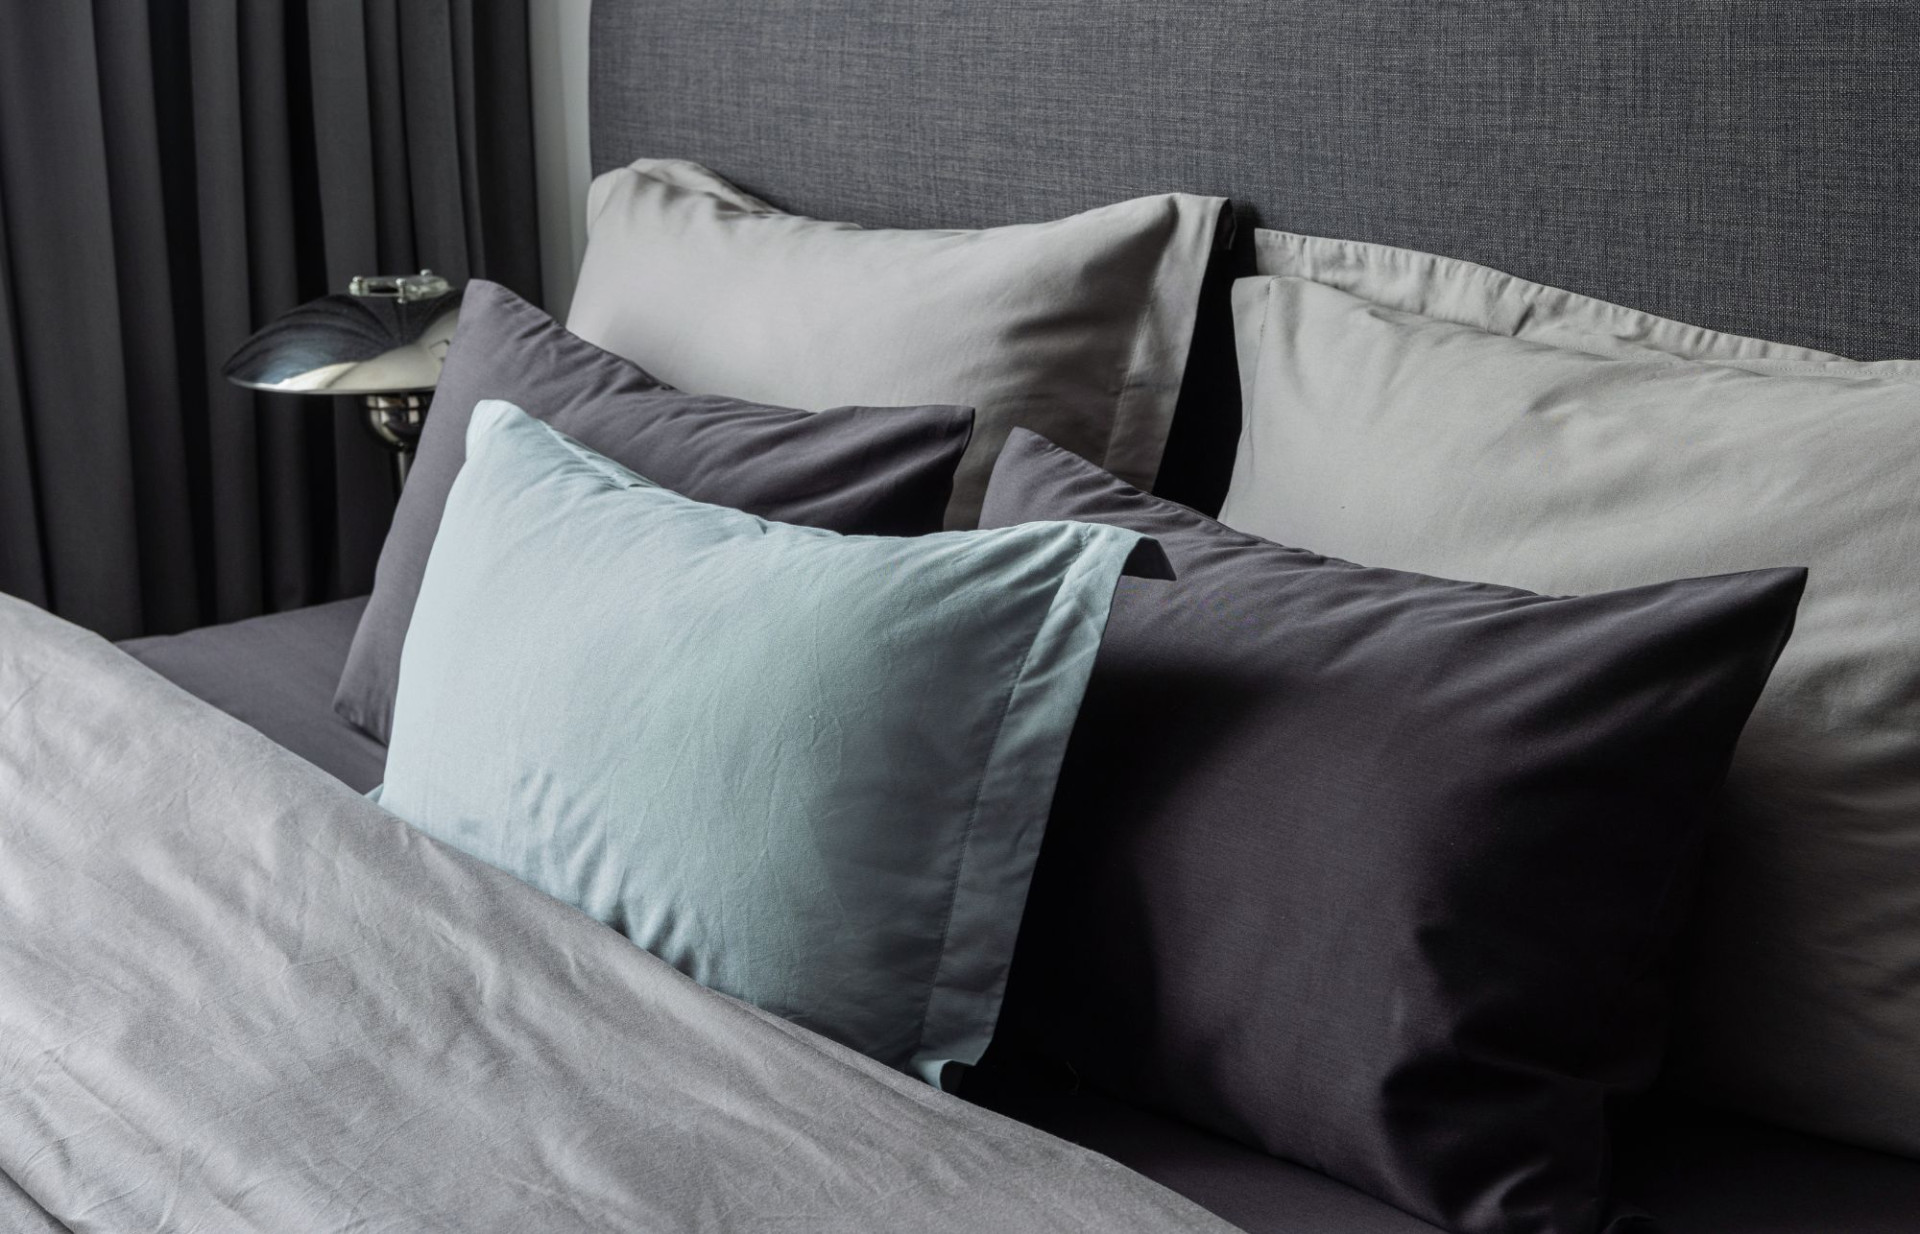 The grey-blue Afternoon Storm pillowcase brings a colourful accent to the monochrome bedroom.